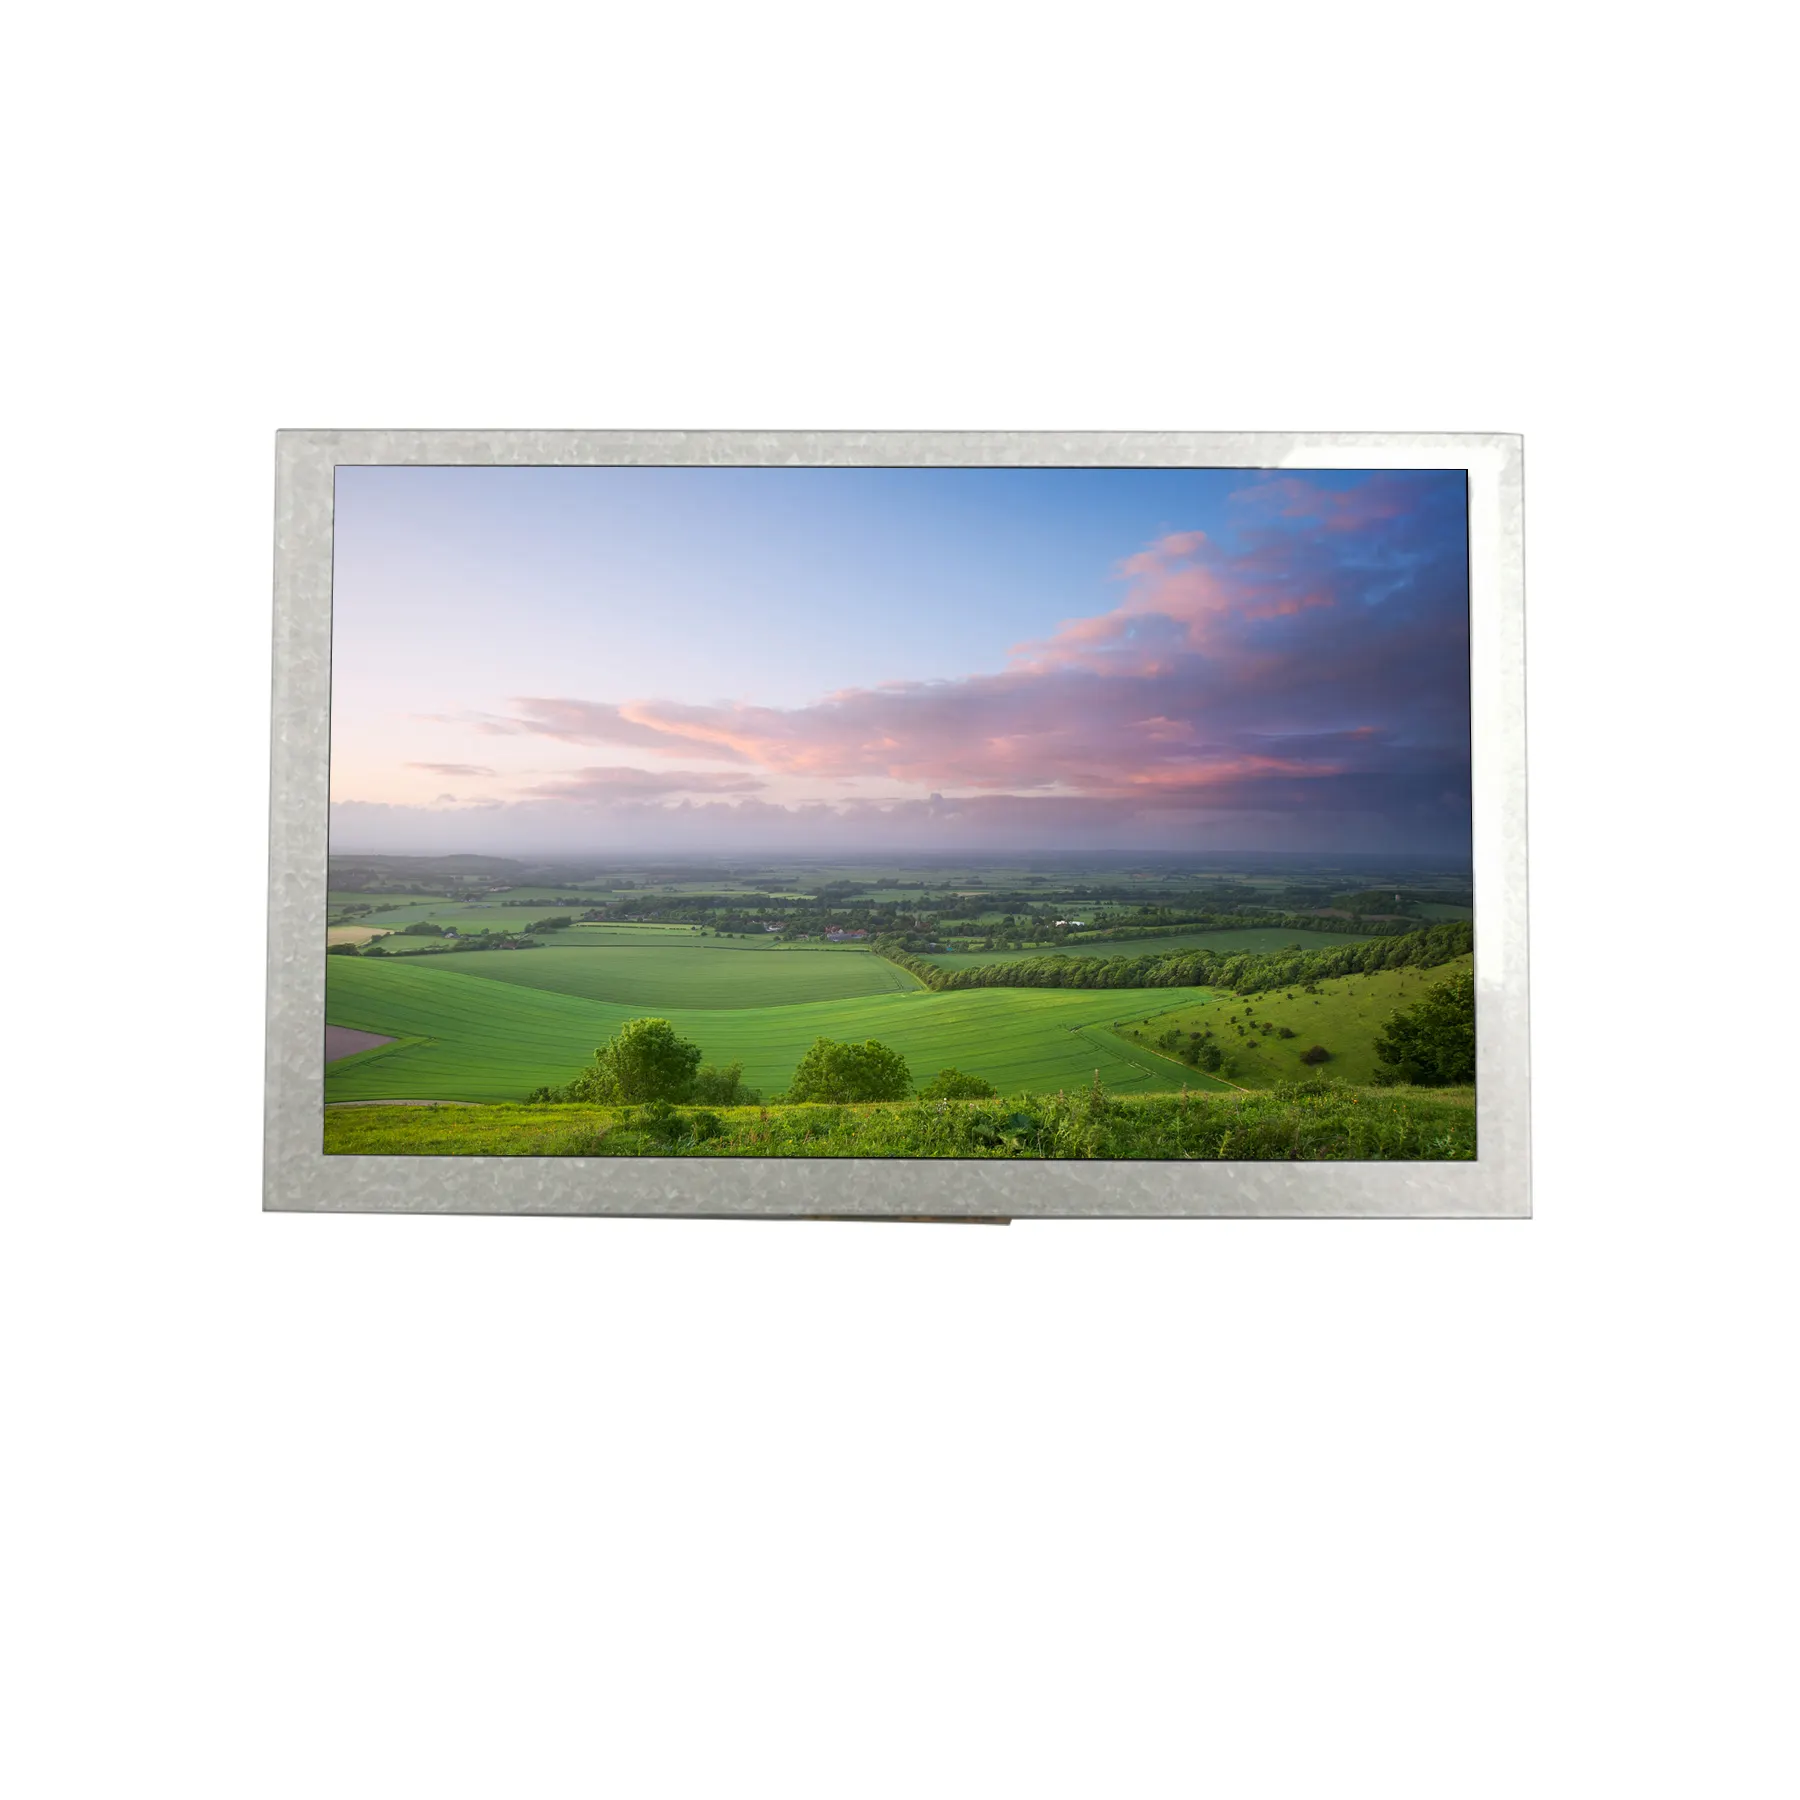 Hoge Kwaliteit Tft 30Pins Lvds Custom Fpc Backlight Lcd Touch Panel Ips Rgb 800X480 7 Inch Lcd module